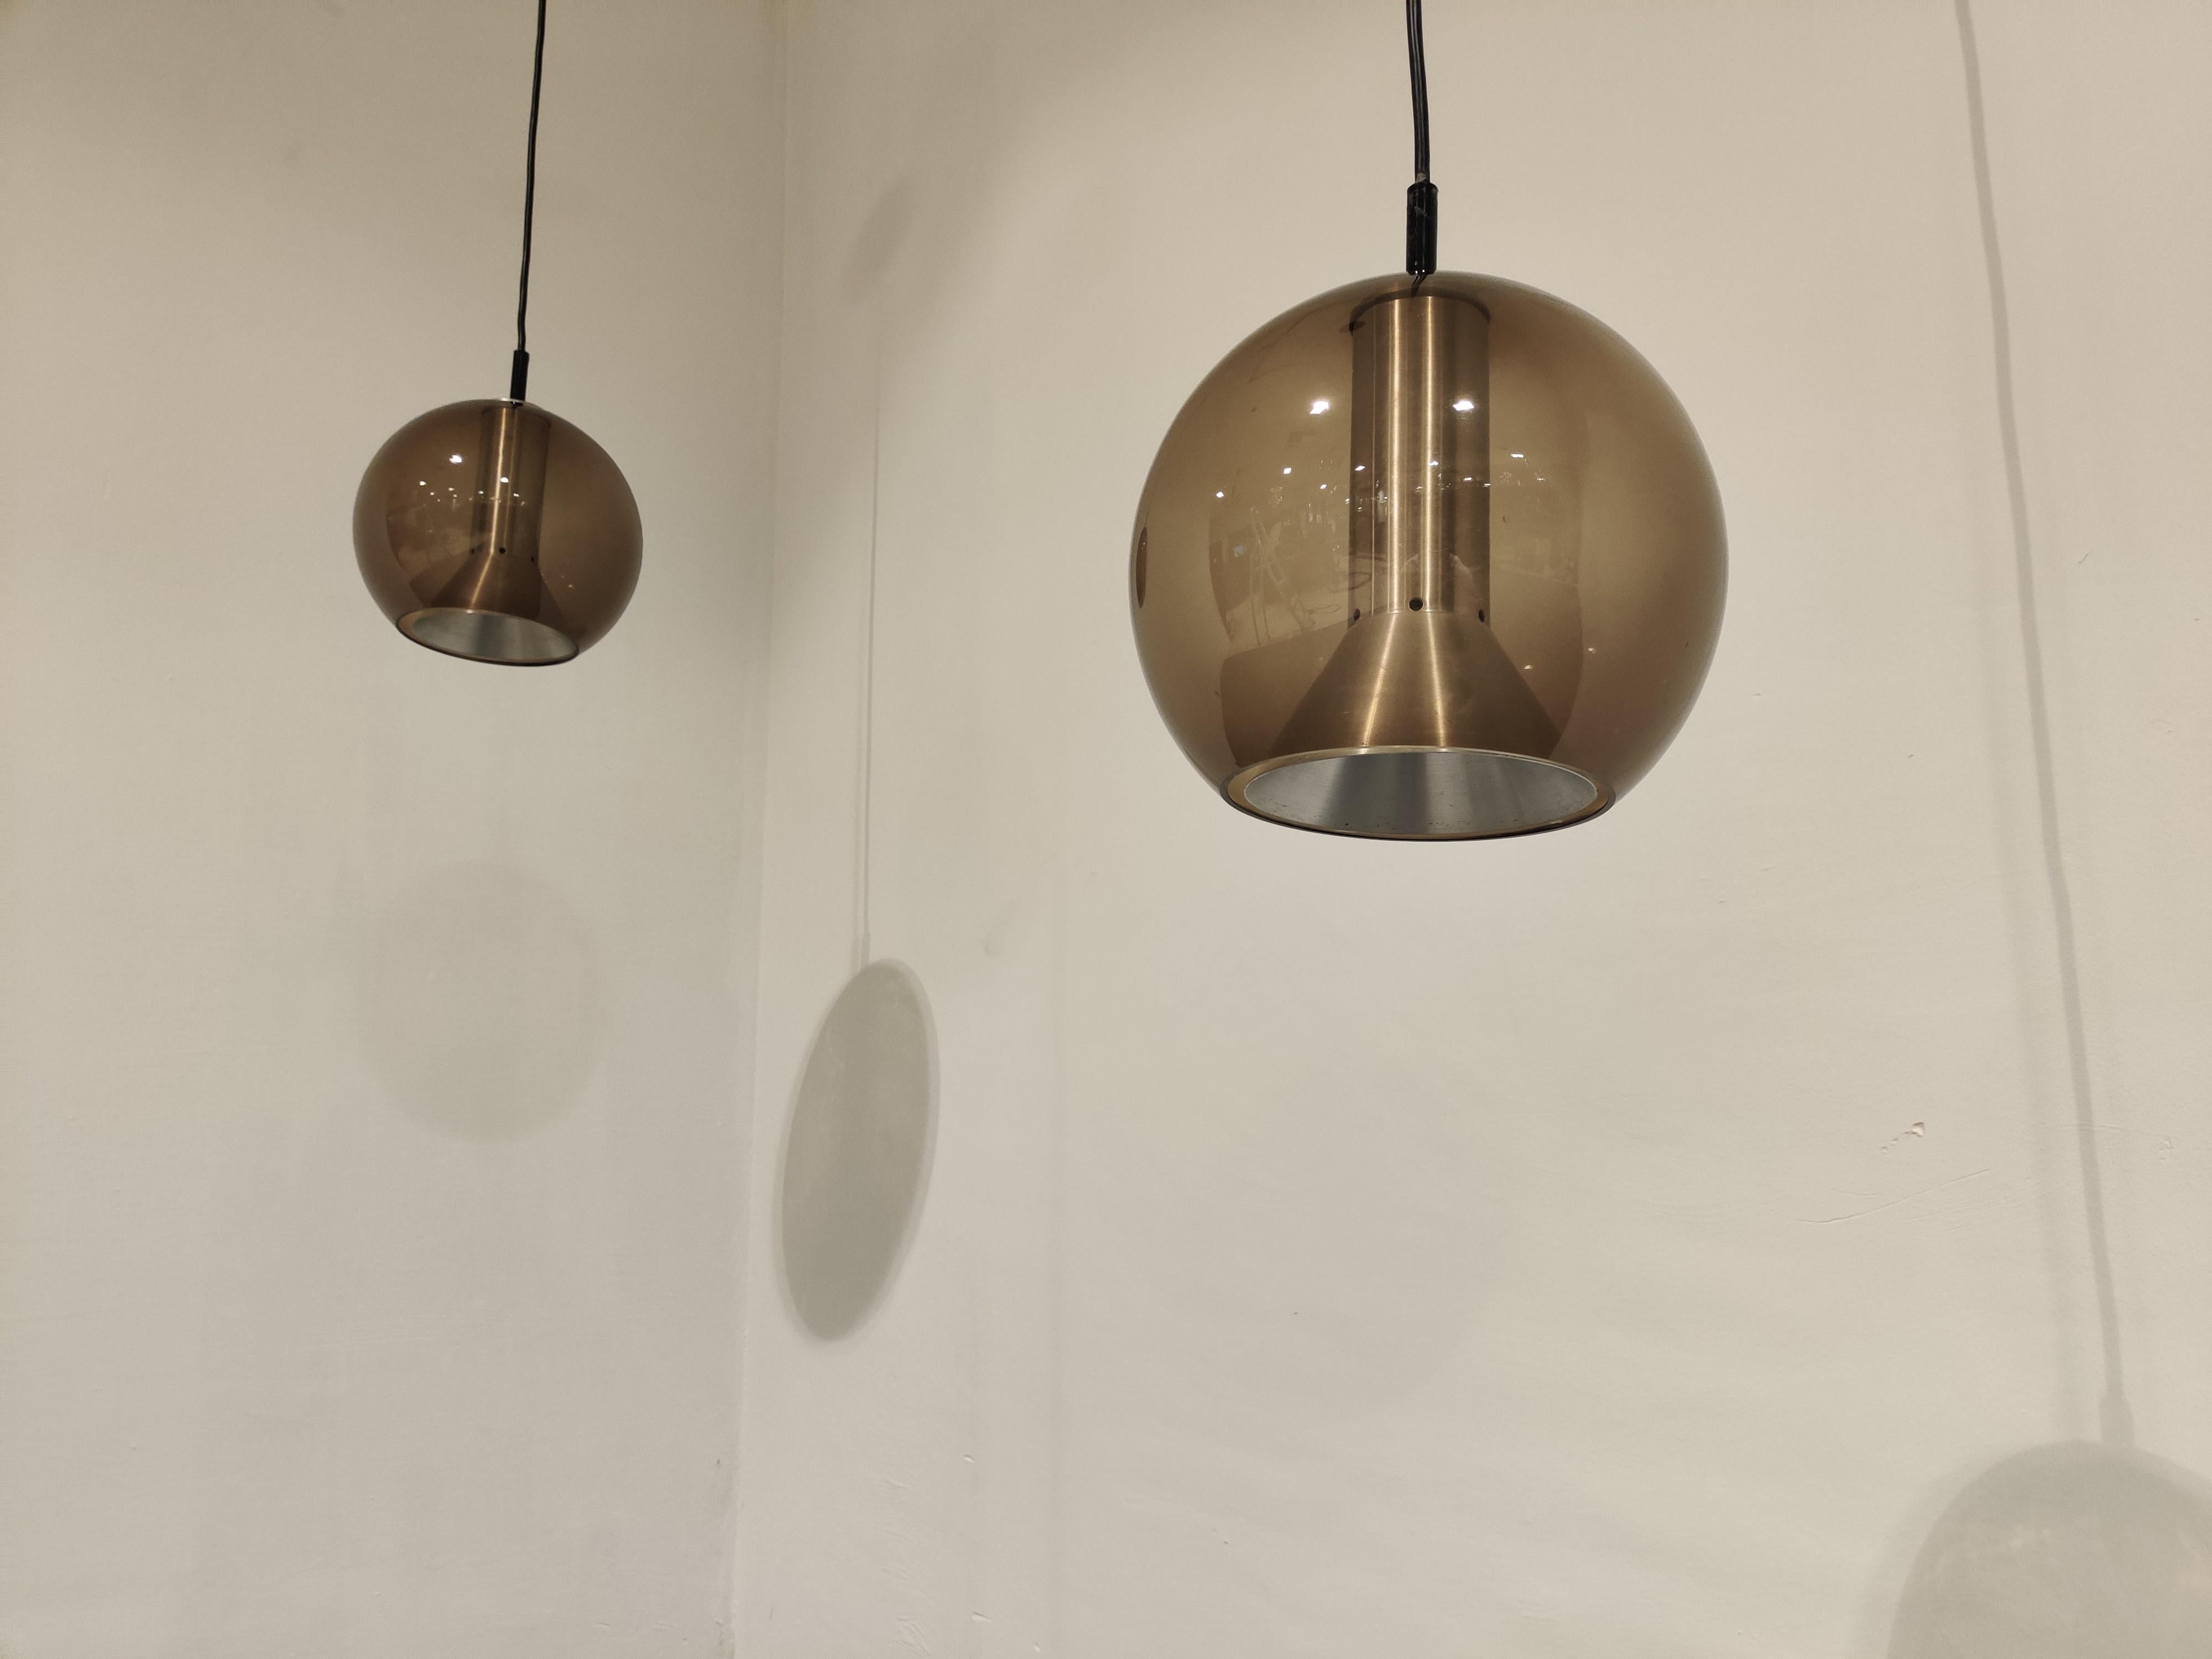 Space Age Pair of Glass Globe Pendant Lights by Frank Ligtelijn for Raam, 1960s